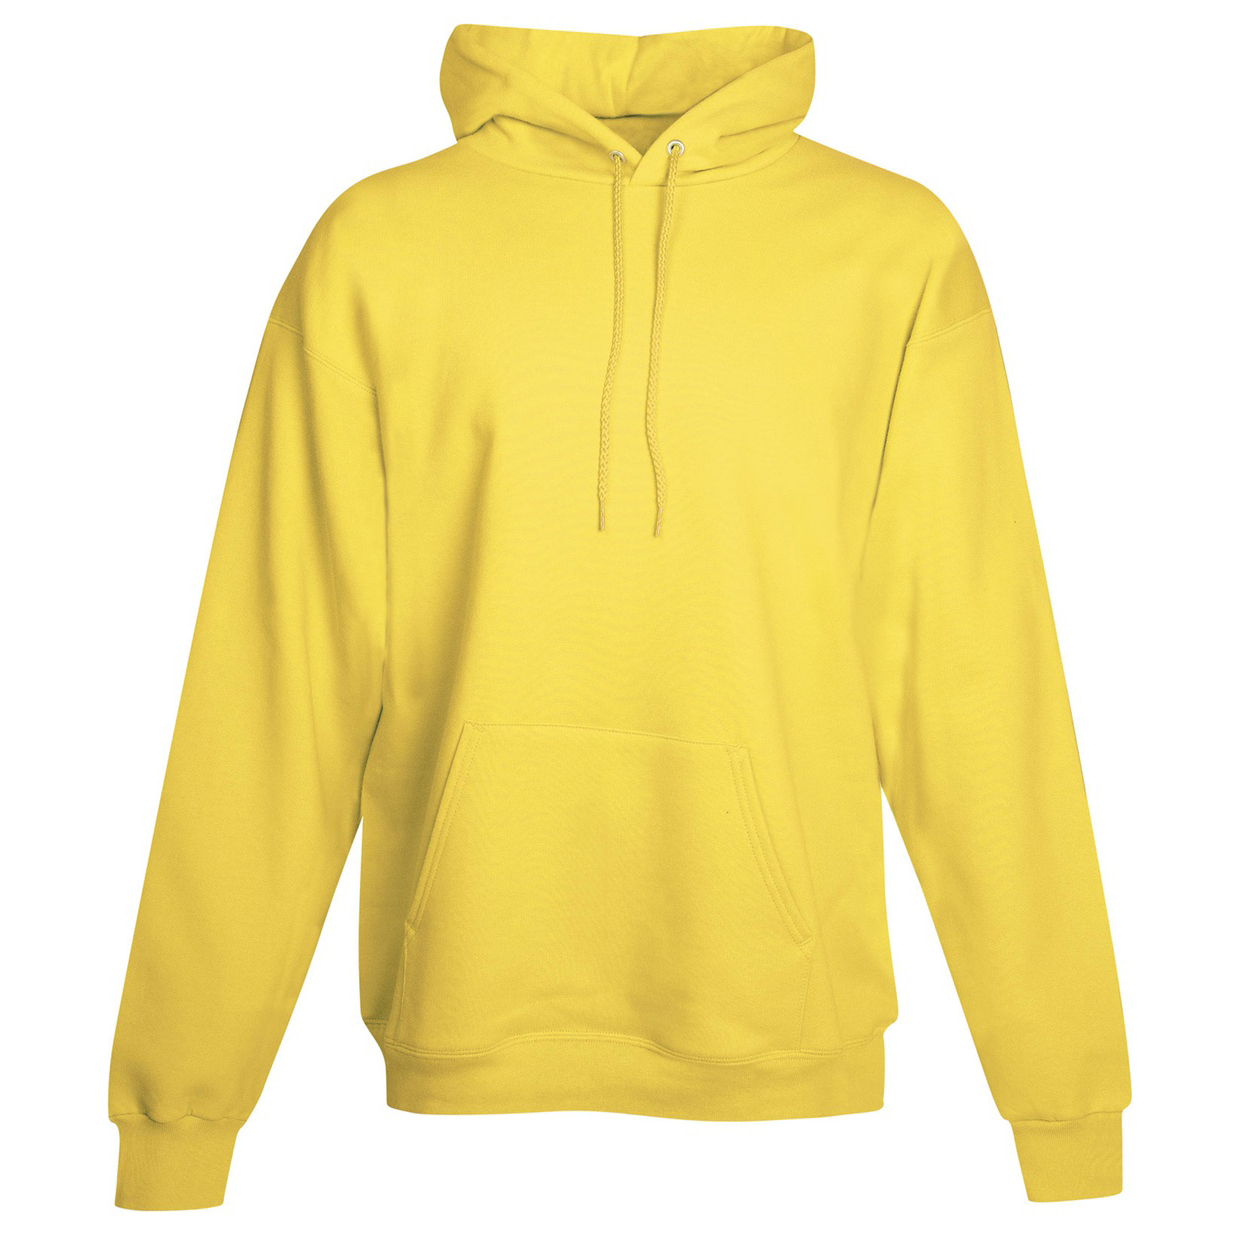 Cheap Custom Hanes 50/50 Hooded Sweatshirt - Printed With Your Design